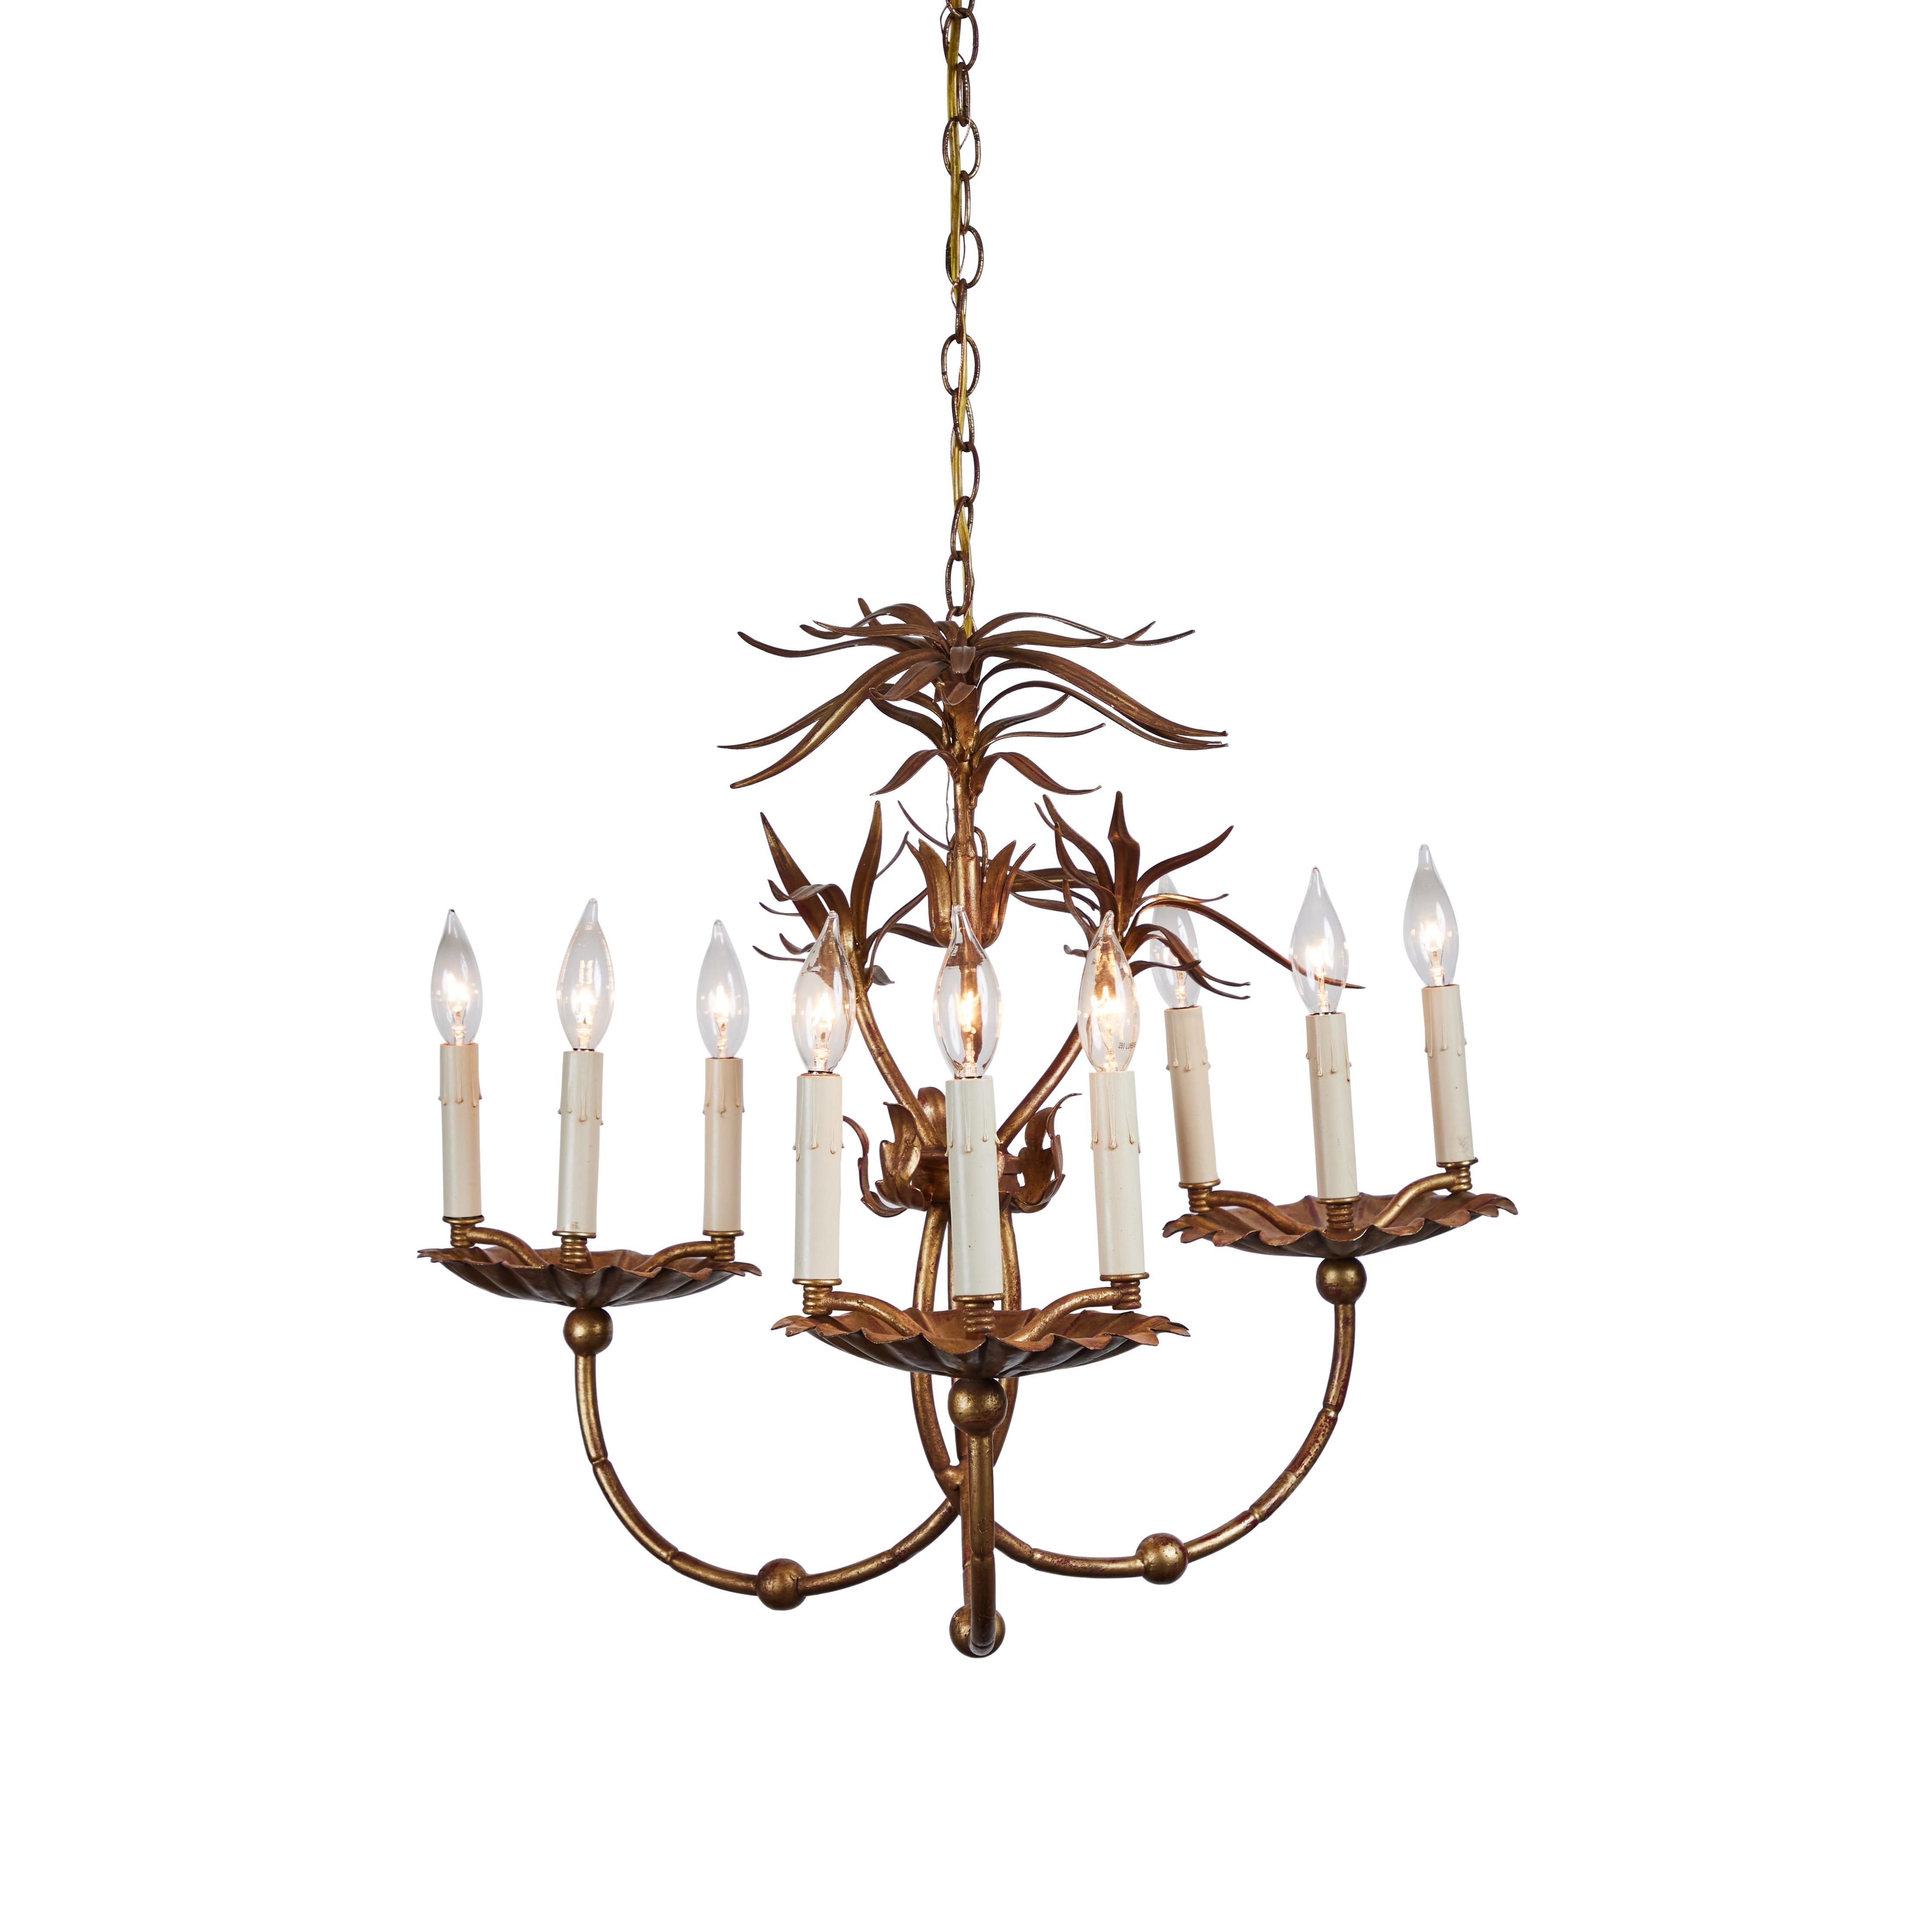 This graceful vintage Chinoiserie style 3-arm faux bamboo hanging chandelier has 9 lights and has been newly rewired. Newly refinished in a distressed gold wash with red showing through, this finish highlight the faux bamboo arms and the flora